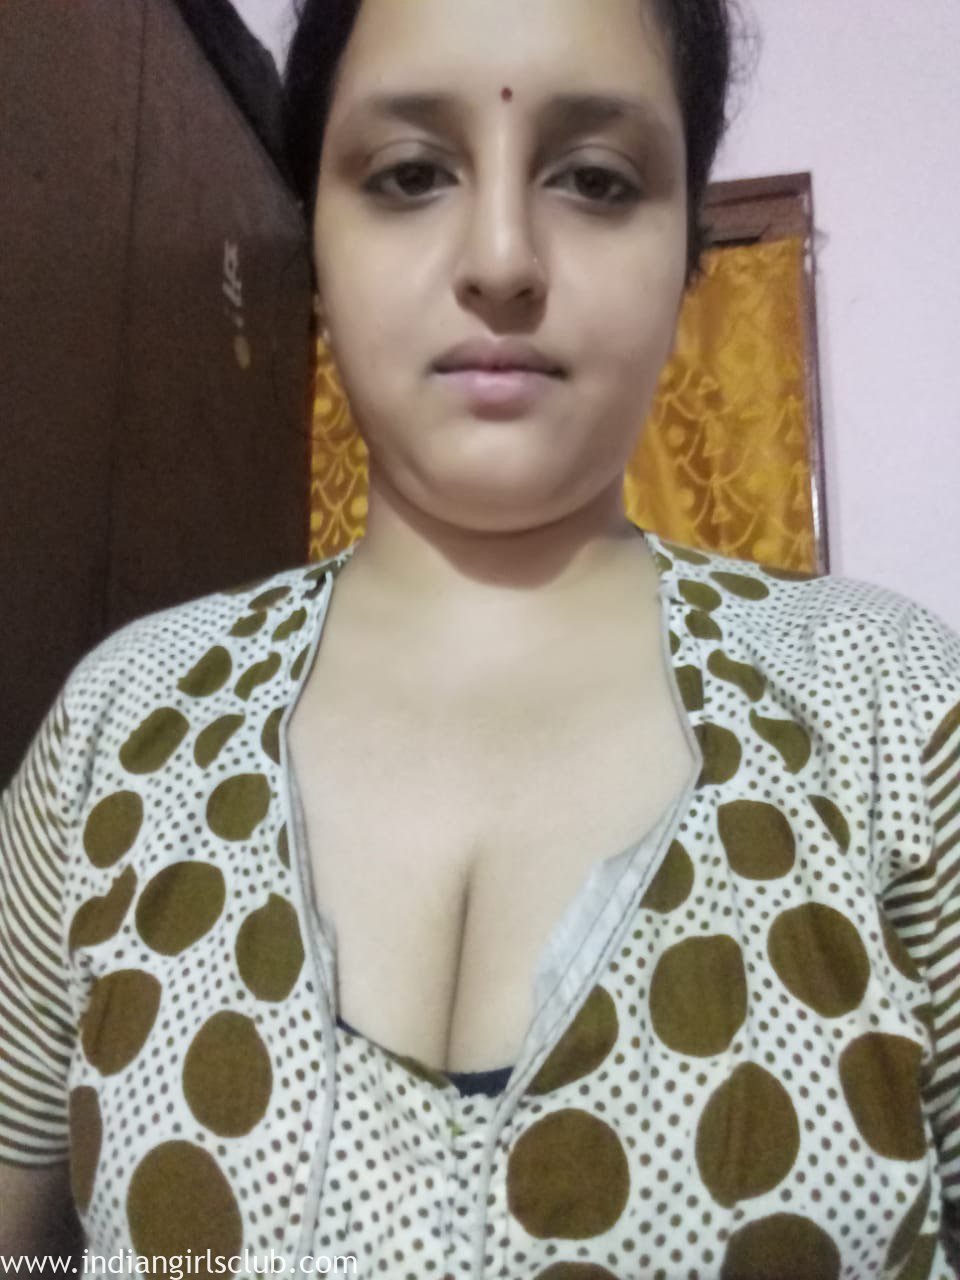 Indian House Wife Sex Boobs - Horny Bengali Indian Housewife Ready For Hot Sex - Indian Girls Club